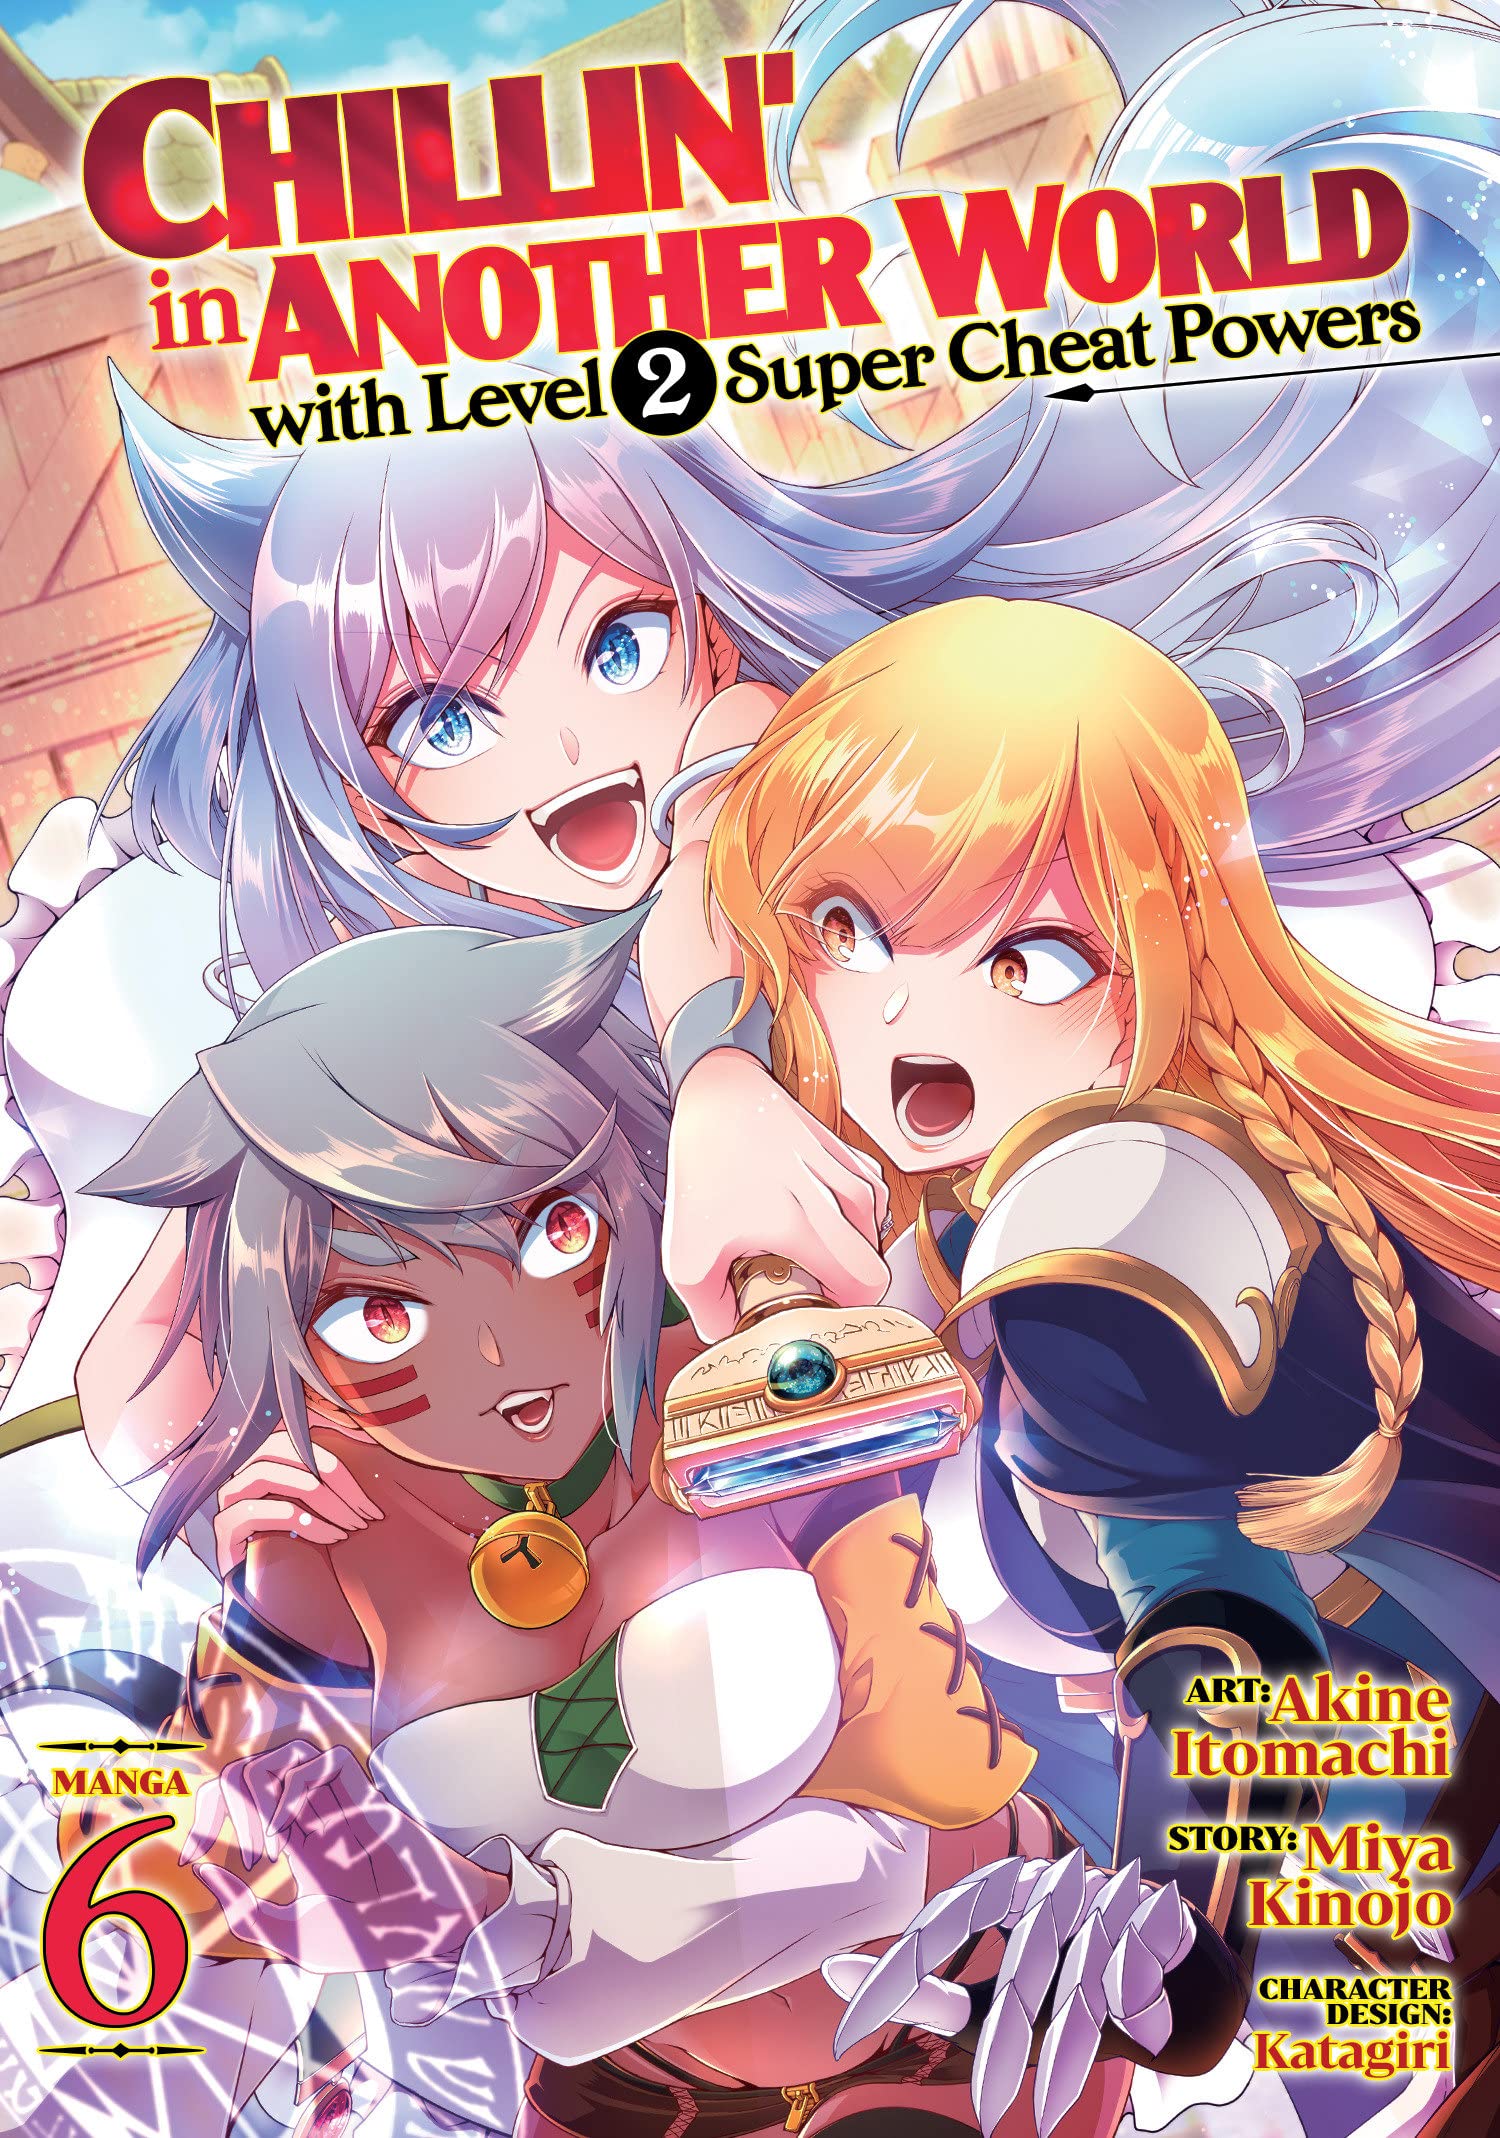 Chillin’ in Another World with Level 2 Super Cheat Powers (Manga) Vol. 06